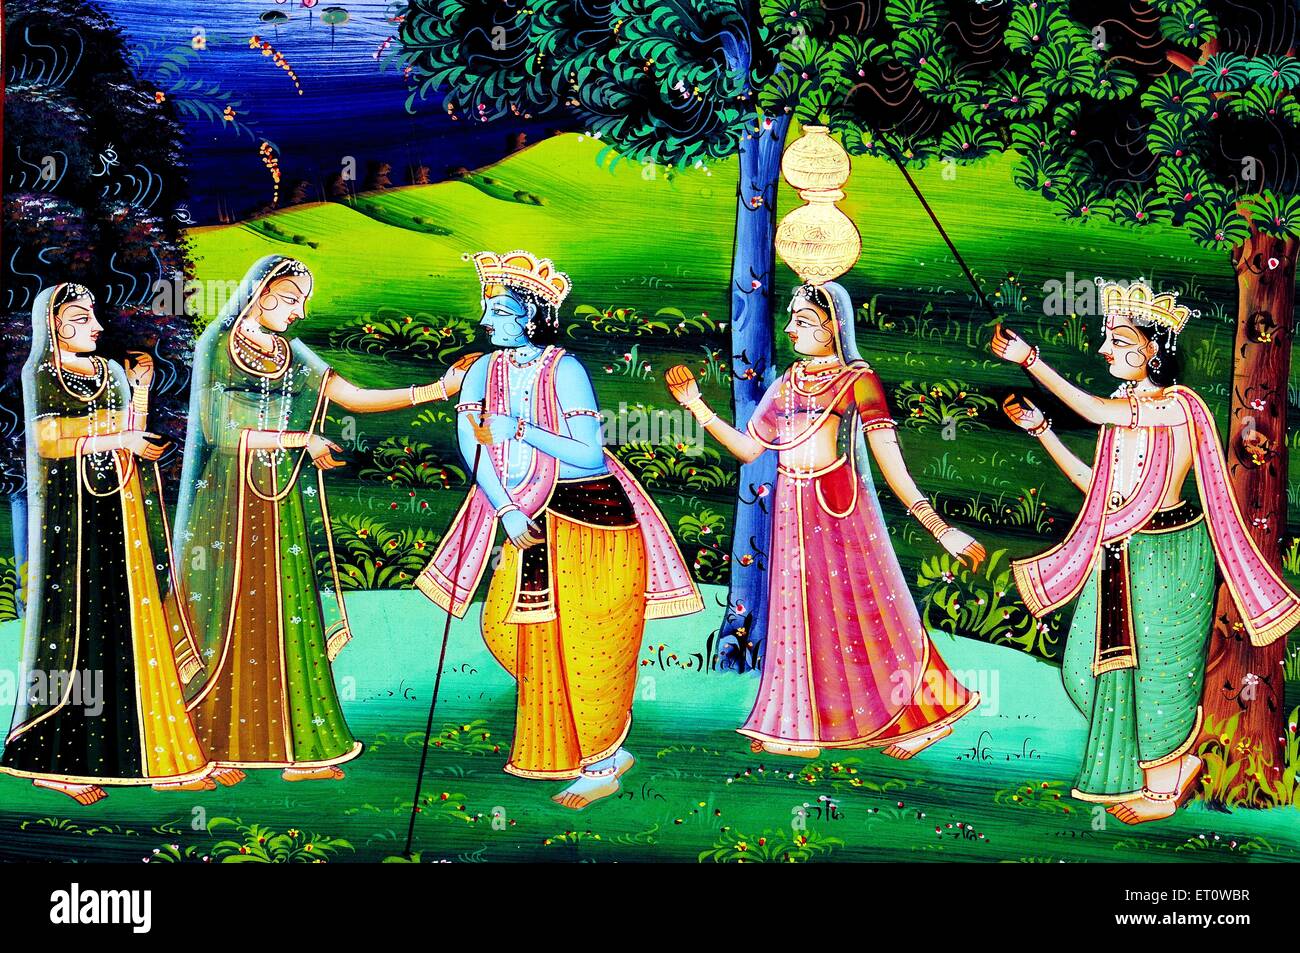 Painting of lord krishna and sudama playing with women ; India Stock Photo  - Alamy